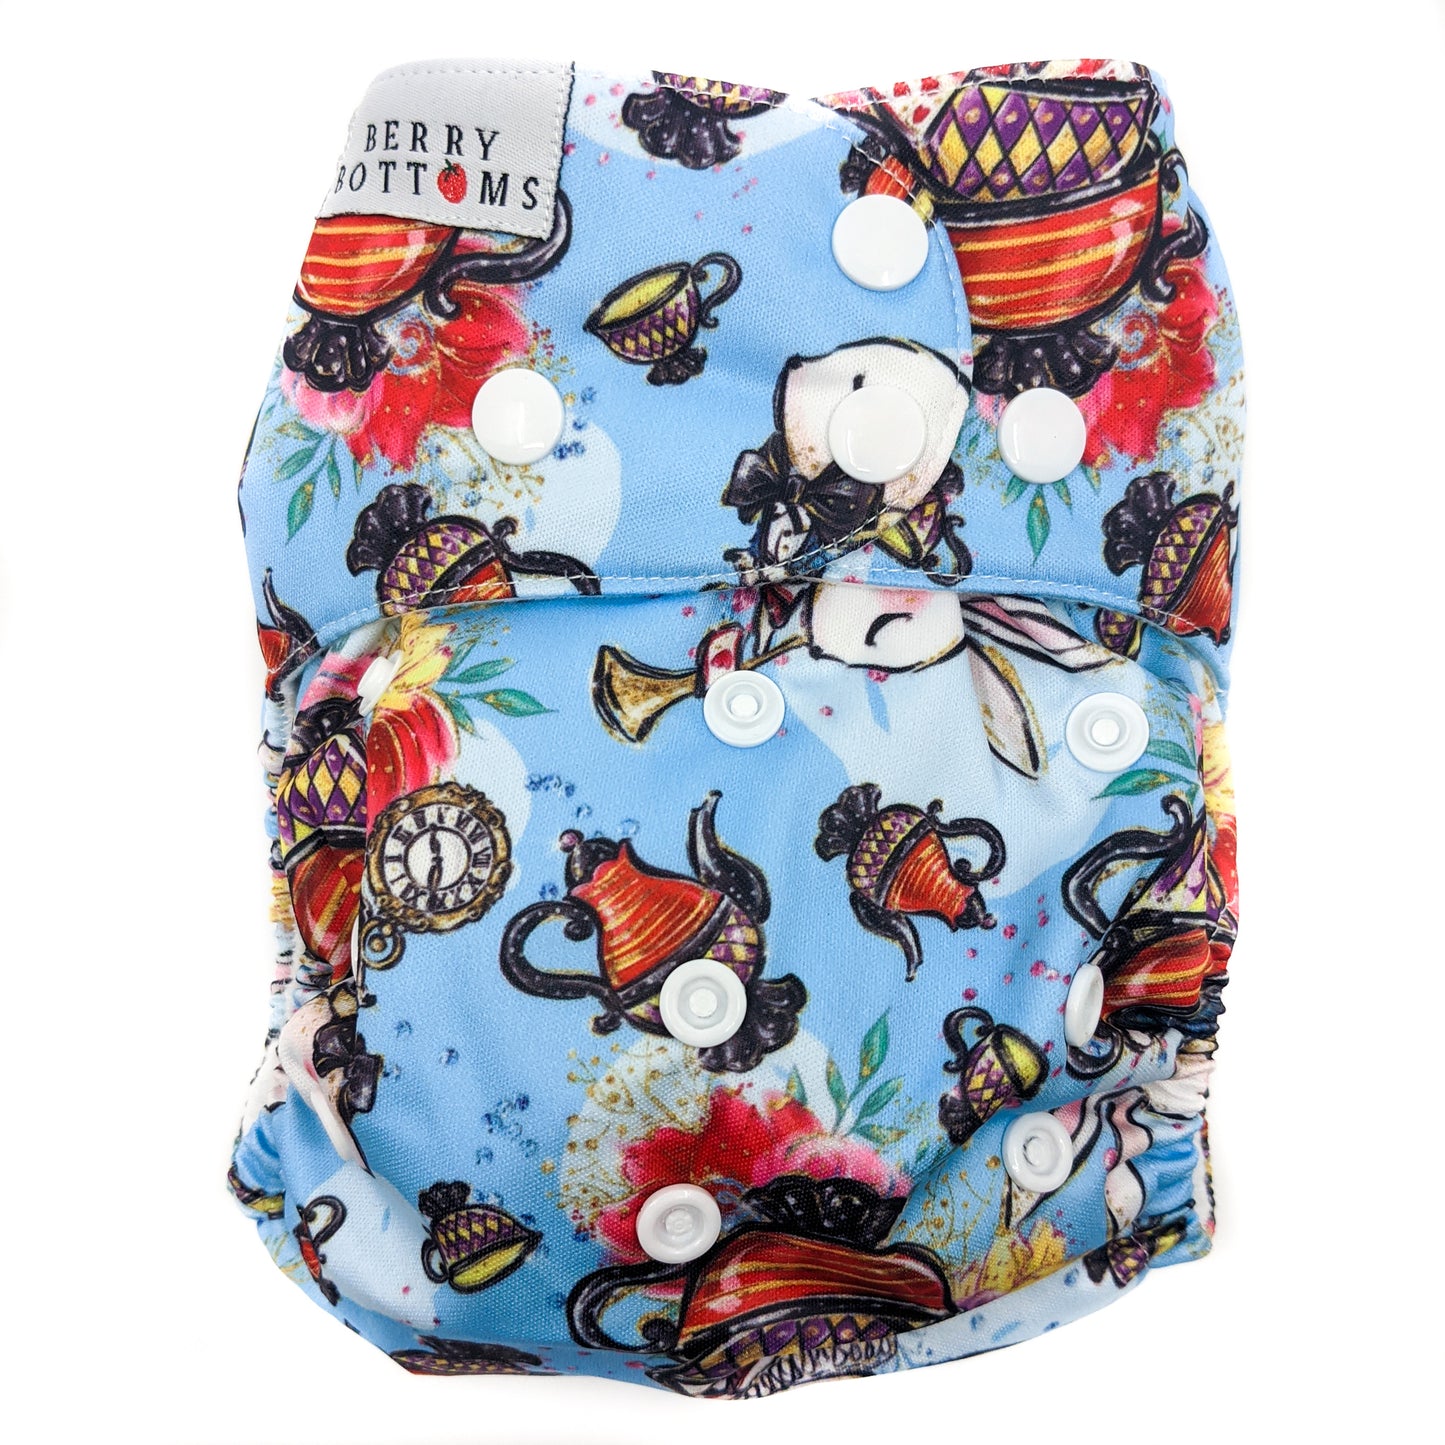 Cloth Nappies - Clearance Packs- Wonderland